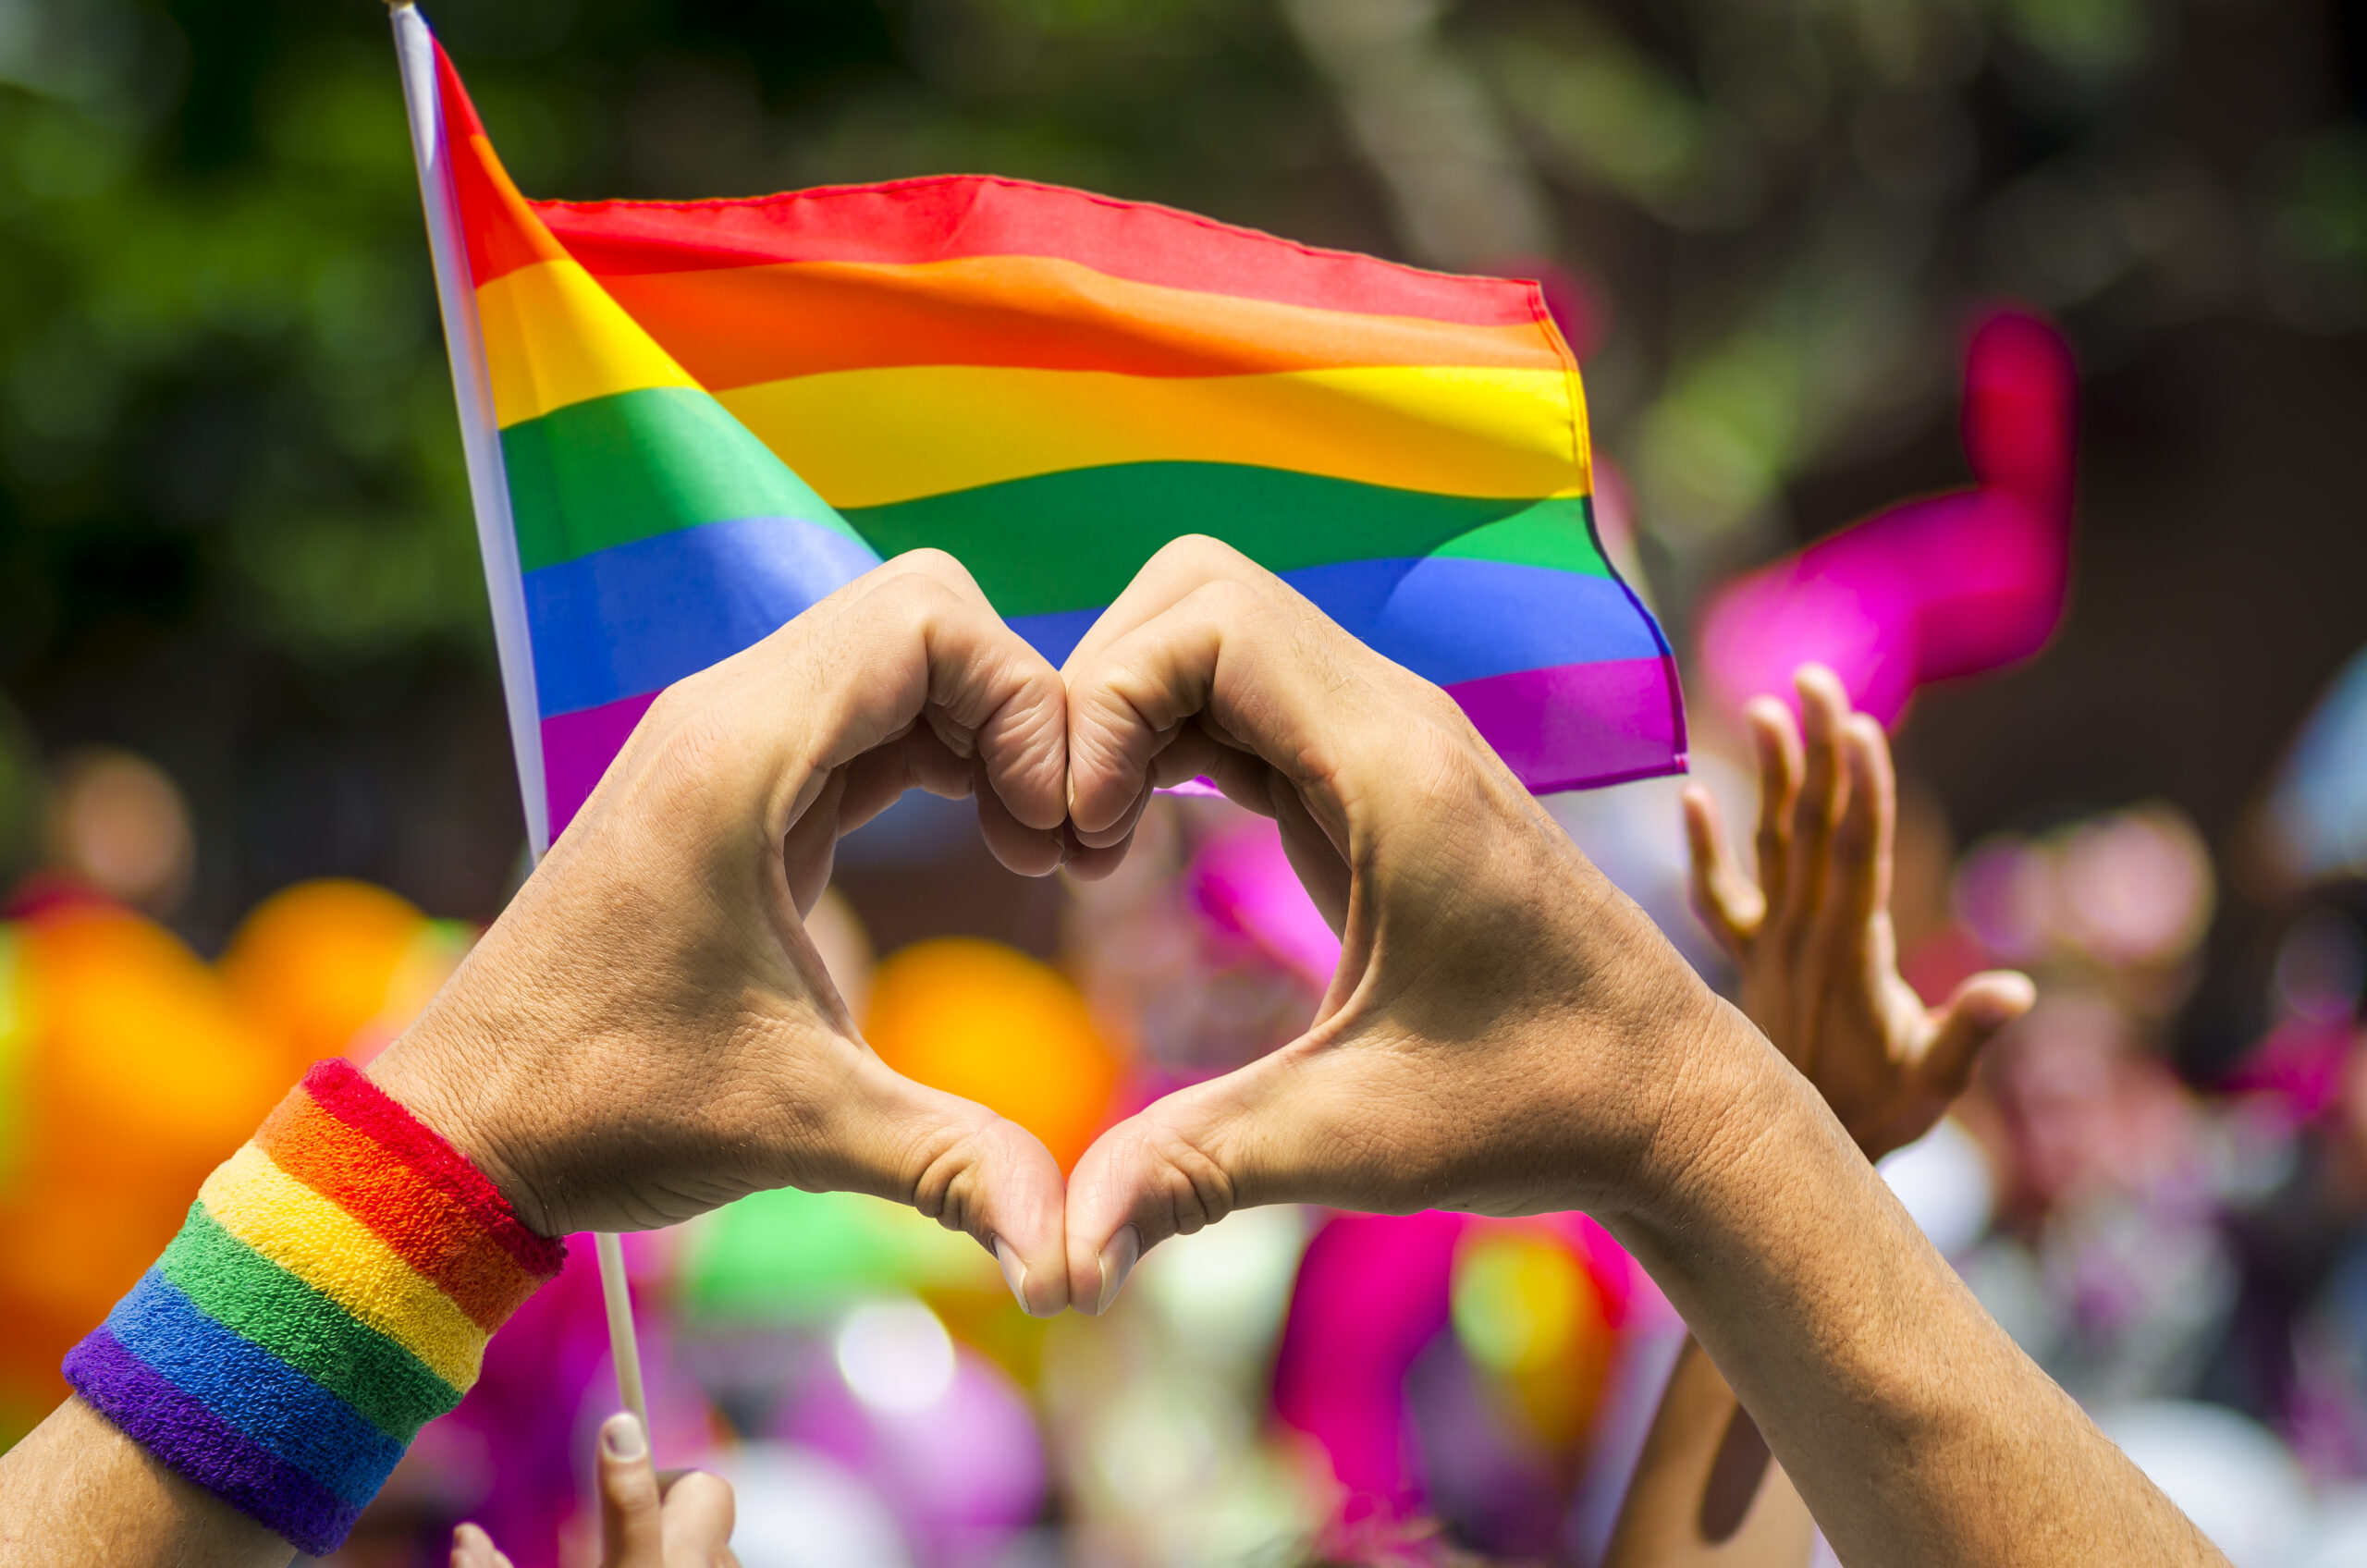 Image of a person's hands forming a heart in front of a rainbow flag